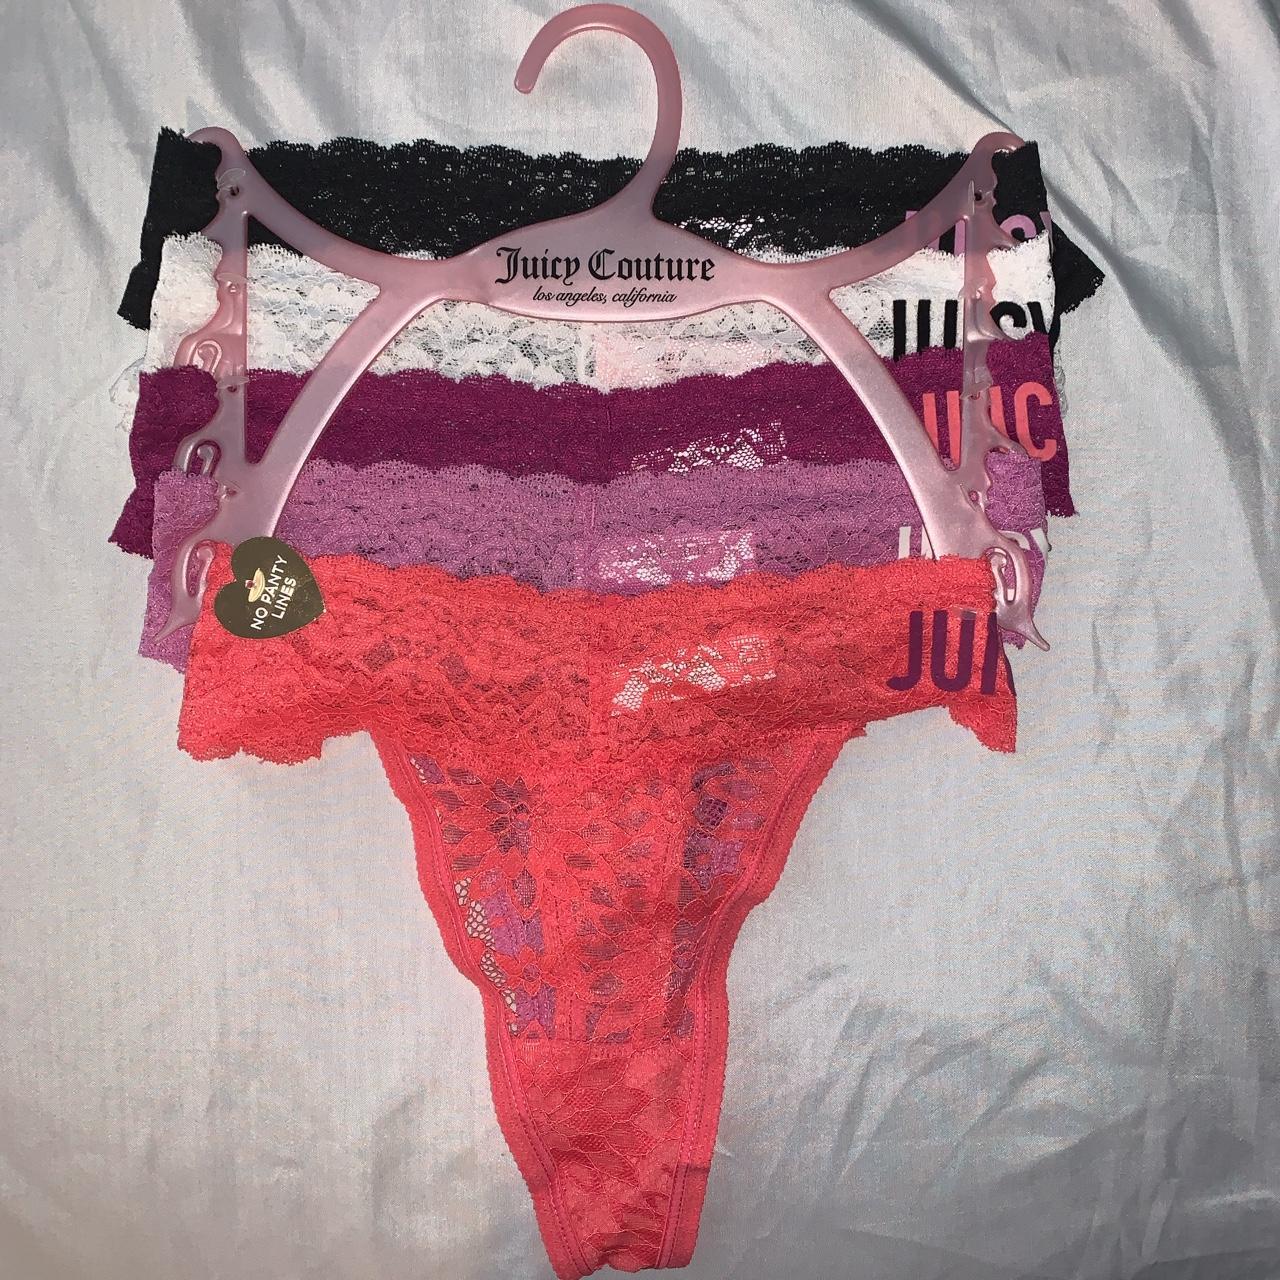 Juicy Couture Los Angeles, California Intimates Panty Collection NWT